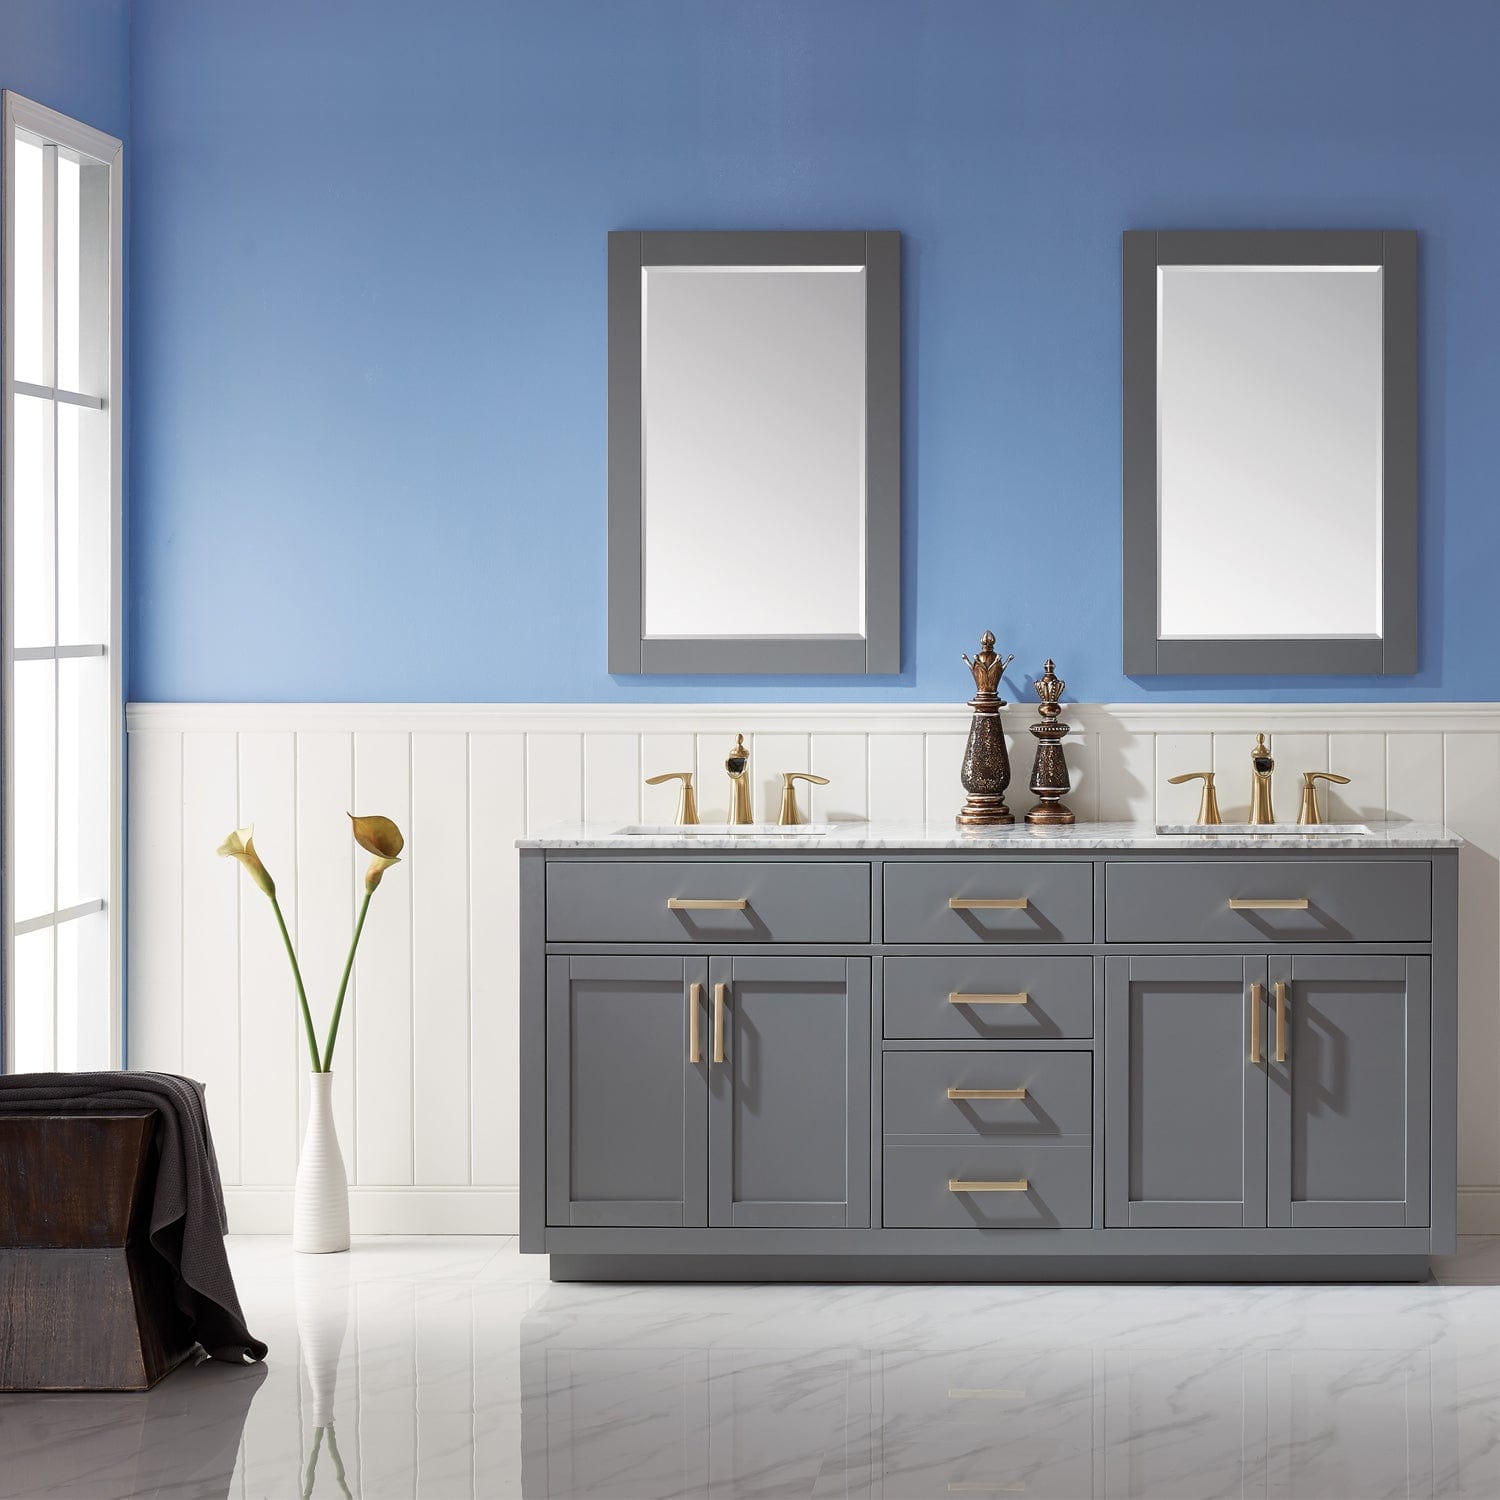 Altair Ivy 72" Double Bathroom Vanity Set in Gray and Carrara White Marble Countertop with Mirror 531072-GR-CA - Molaix631112971270Vanity531072-GR-CA